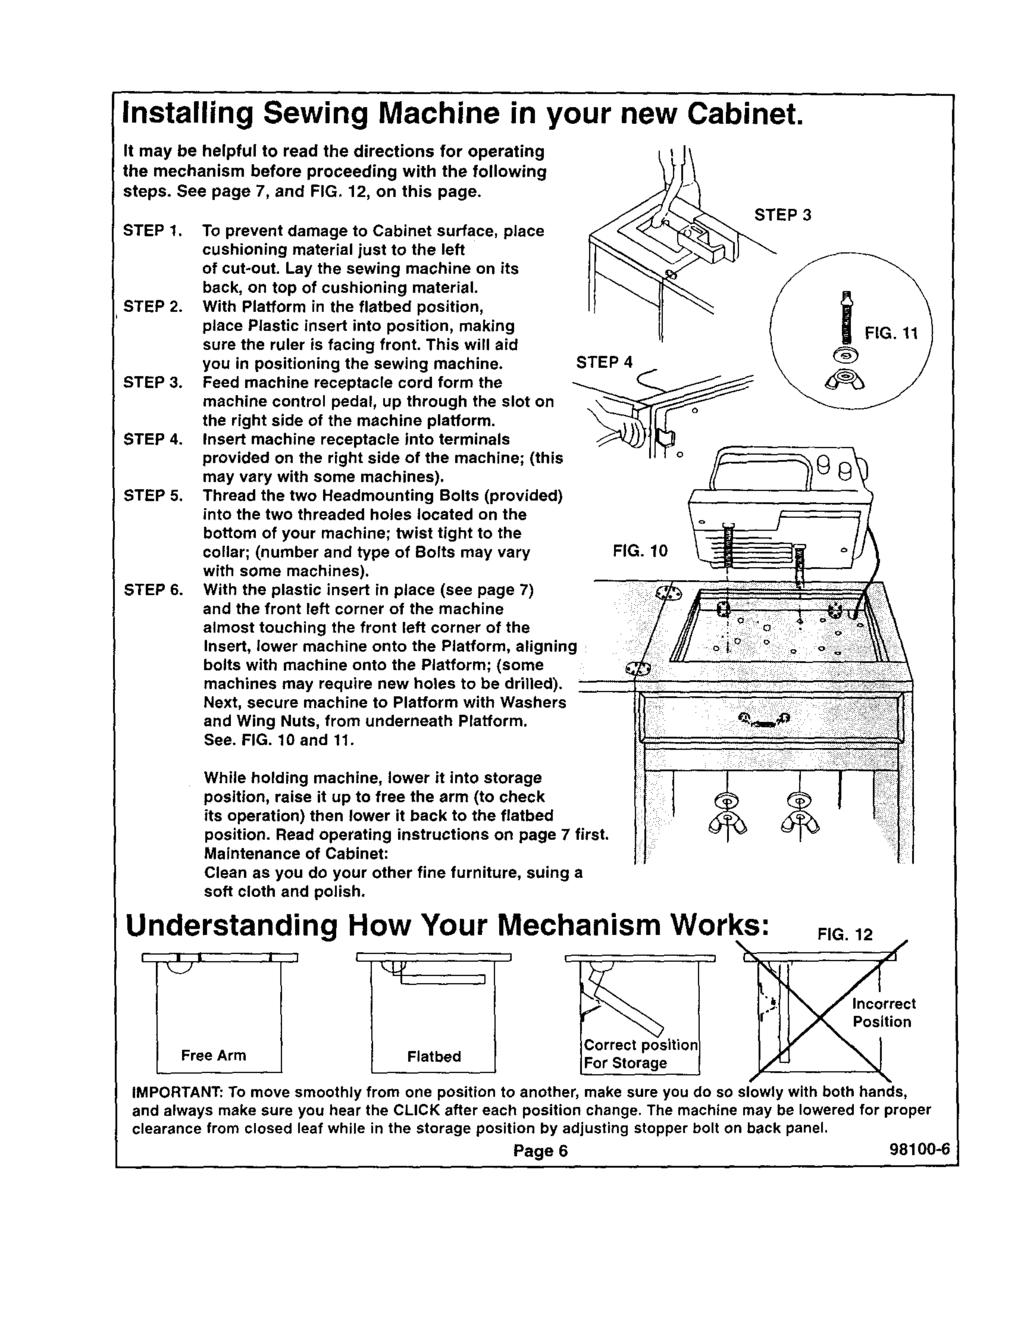 Installing Sewing Machine in yur new Cabinet. It may be helpful t read the directins fr perating the mechanism befre prceeding with the fllwing steps. See page 7, and FIG. 12, n this page. STEP 1.